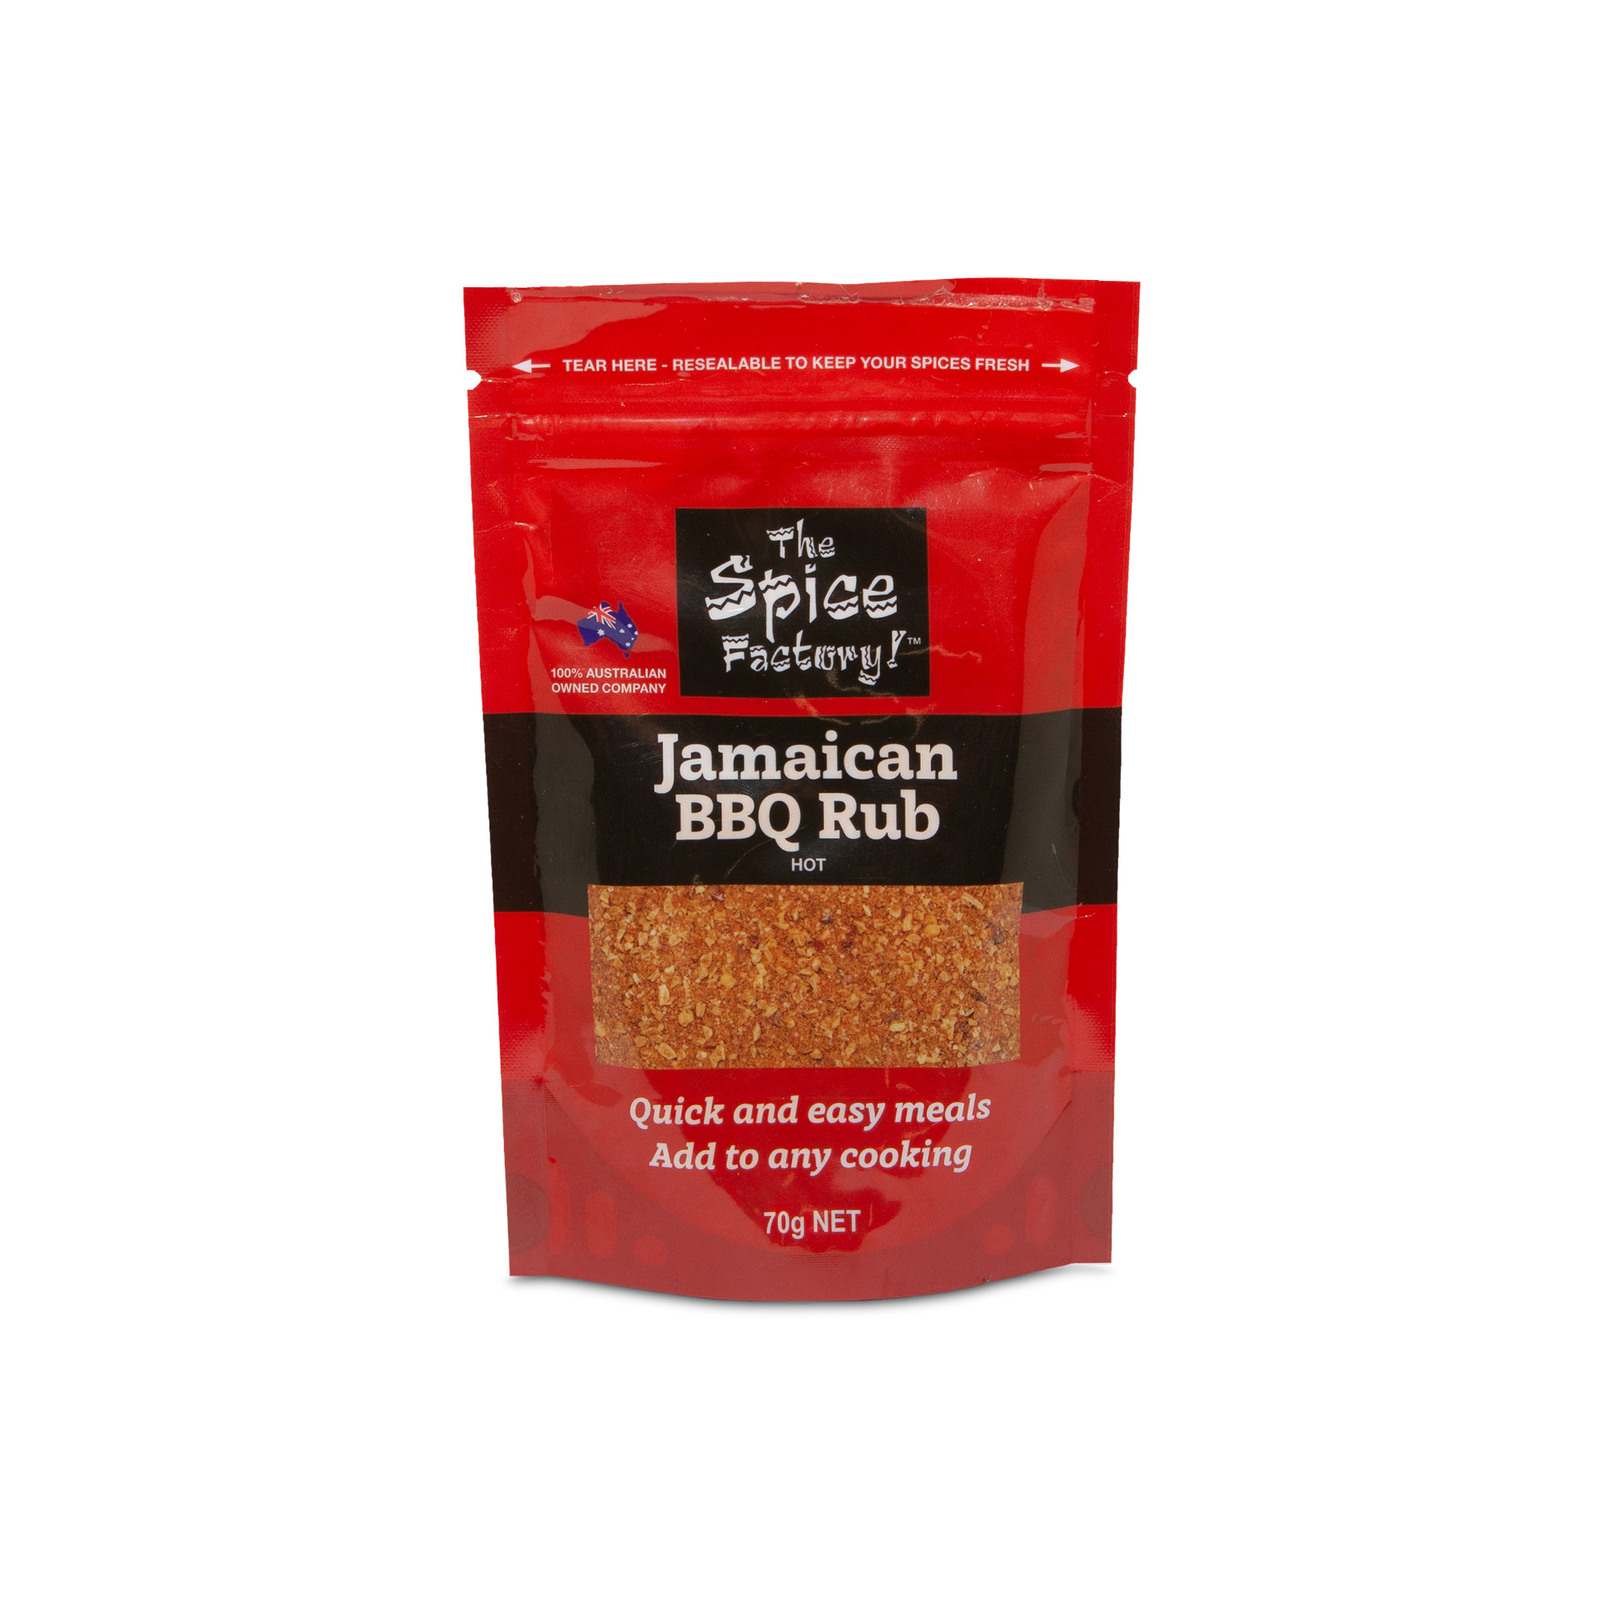 https://www.thechillifactory.com/rubs-spices/jamaican-rub